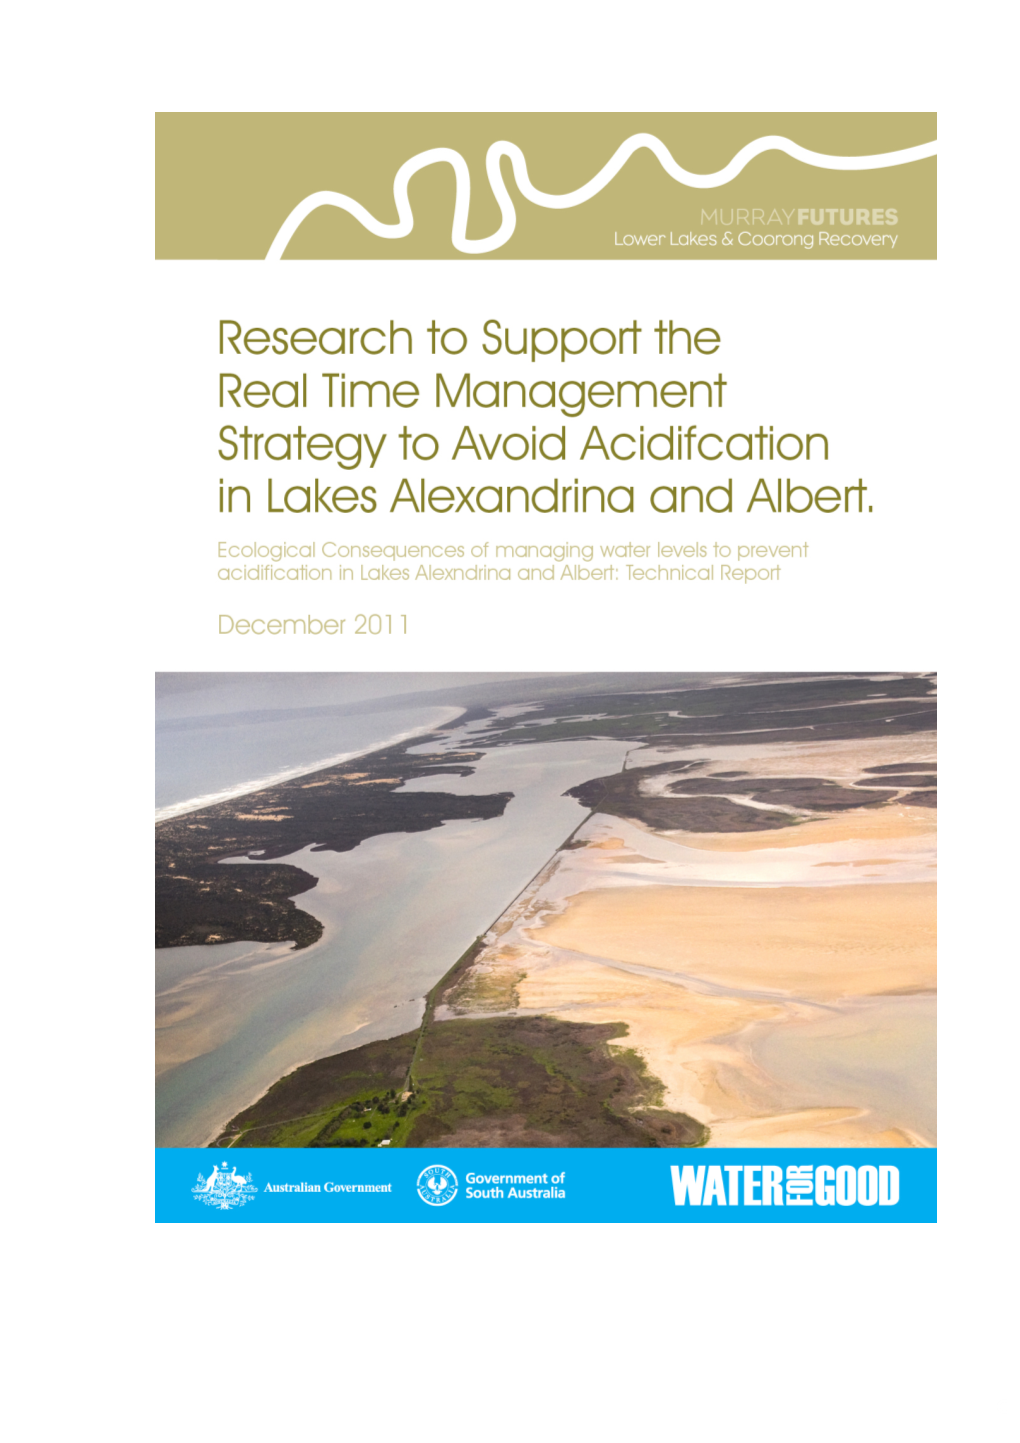 Ecological Consequences of Managing Water Levels to Prevent Acidification in Lakes Alexandrina and Albert: Technical Report